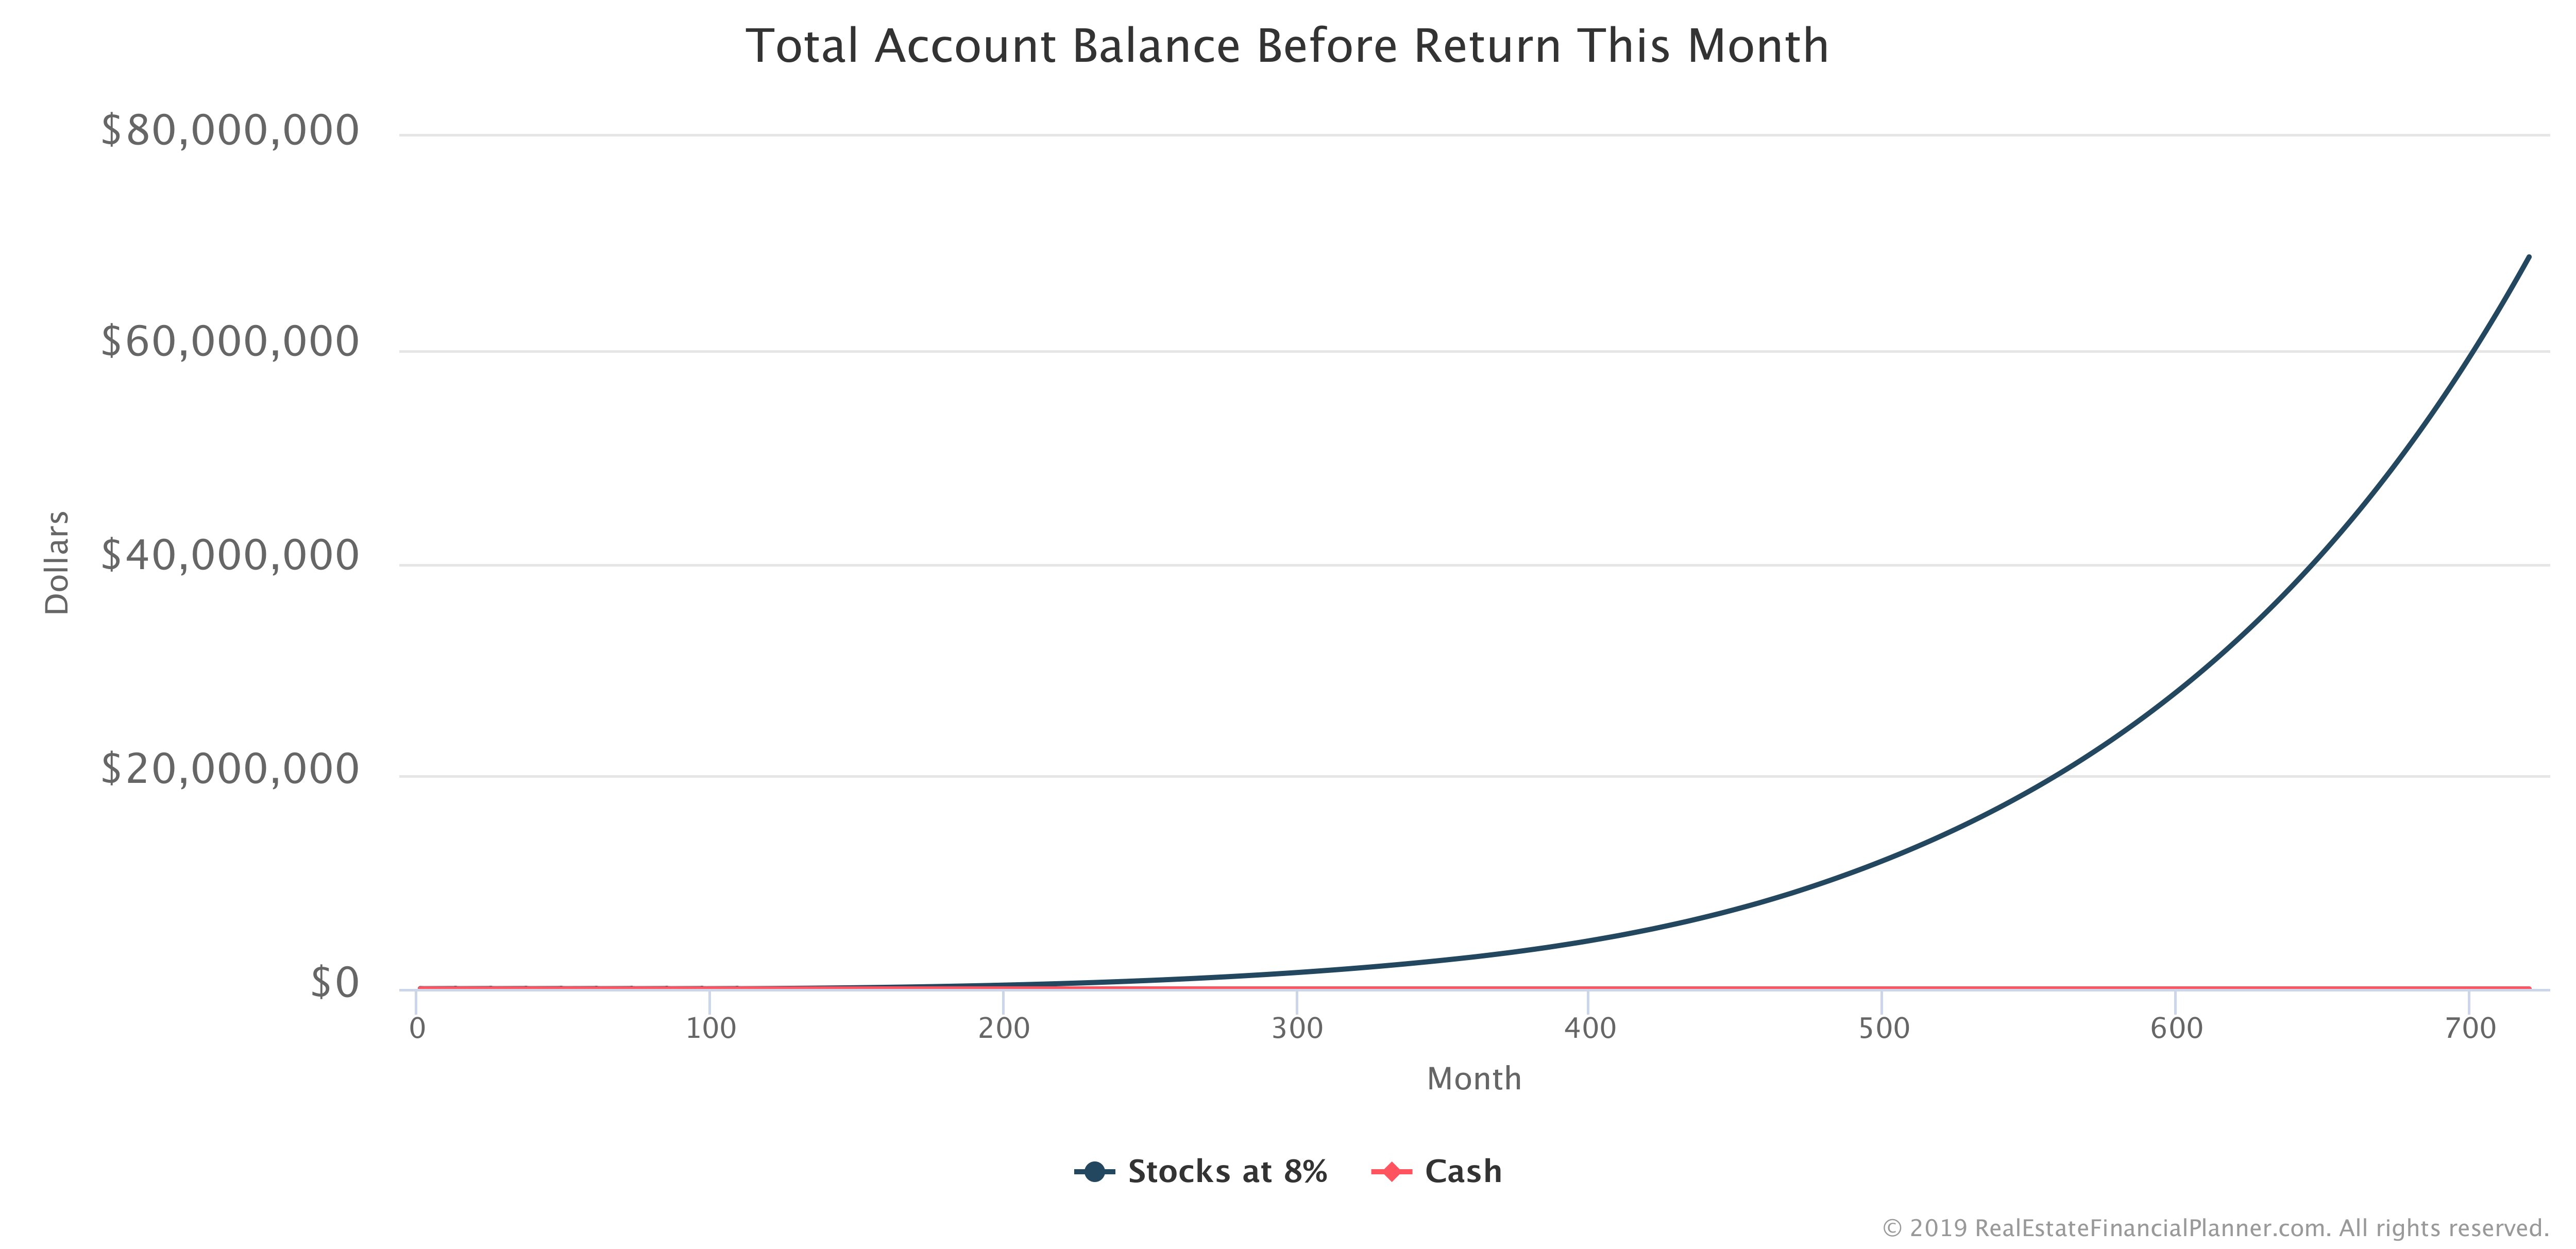 Total Account Balance Before Return This Month